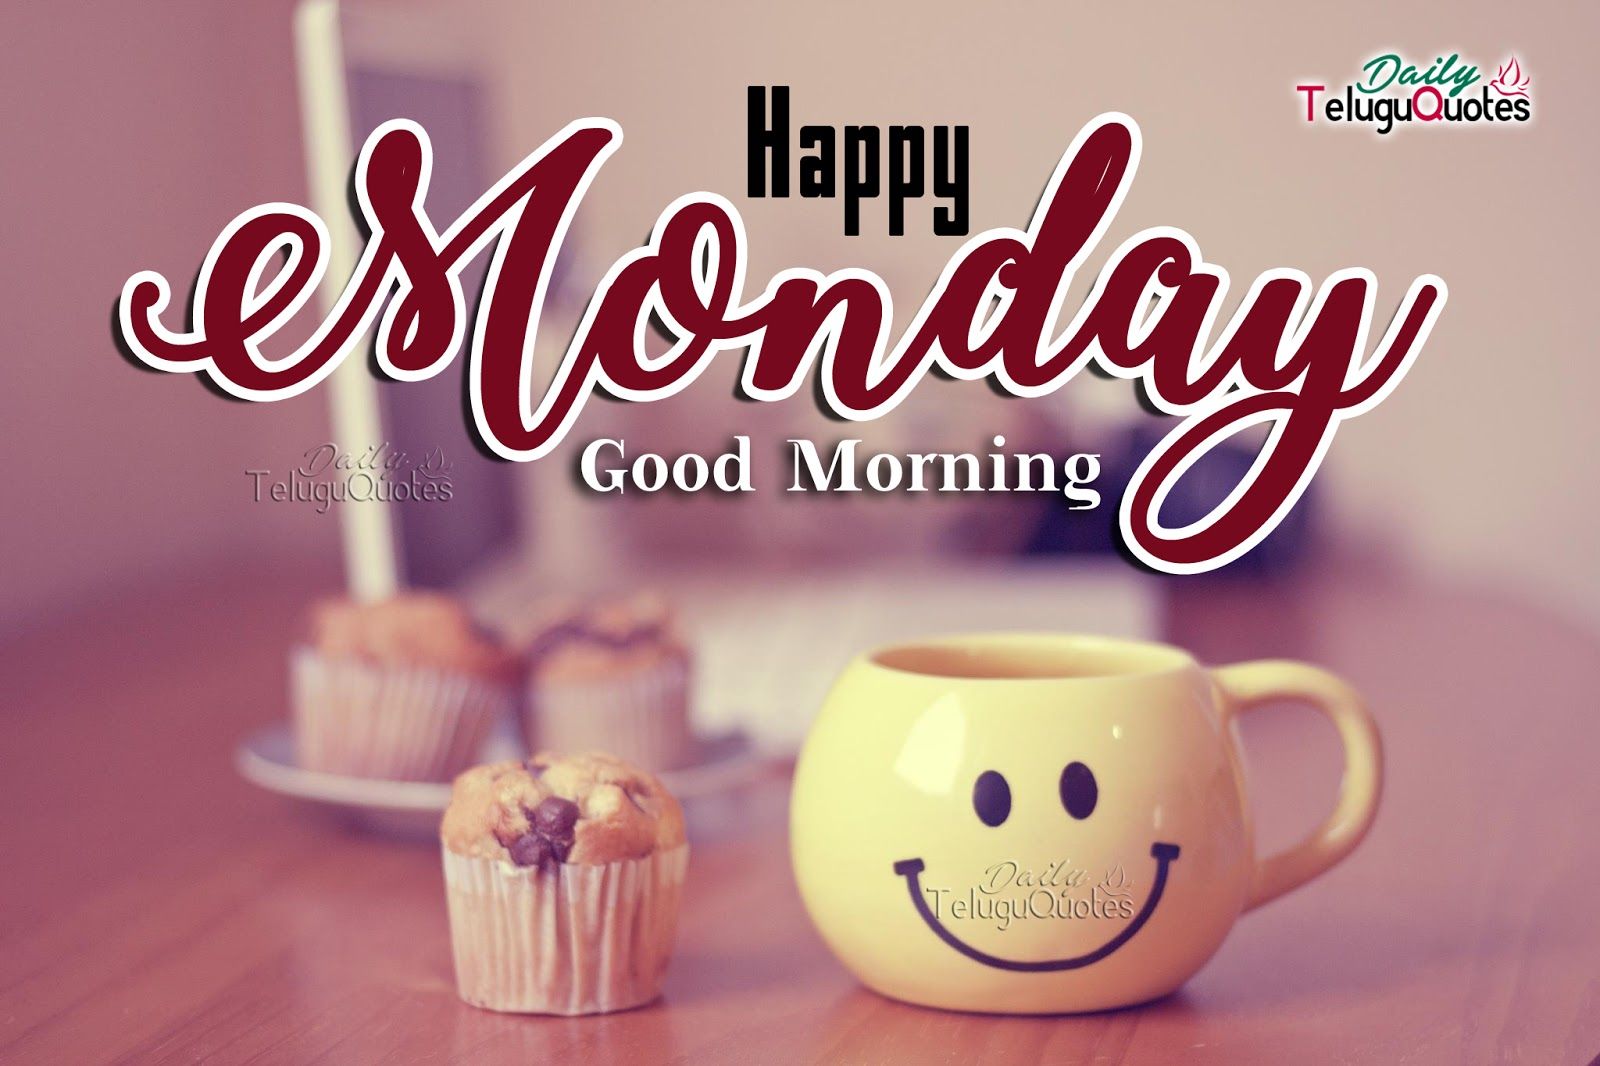 Good Morning Happy Monday Image Picture Quotes Wallpaper Morning Monday Wishes HD Wallpaper & Background Download